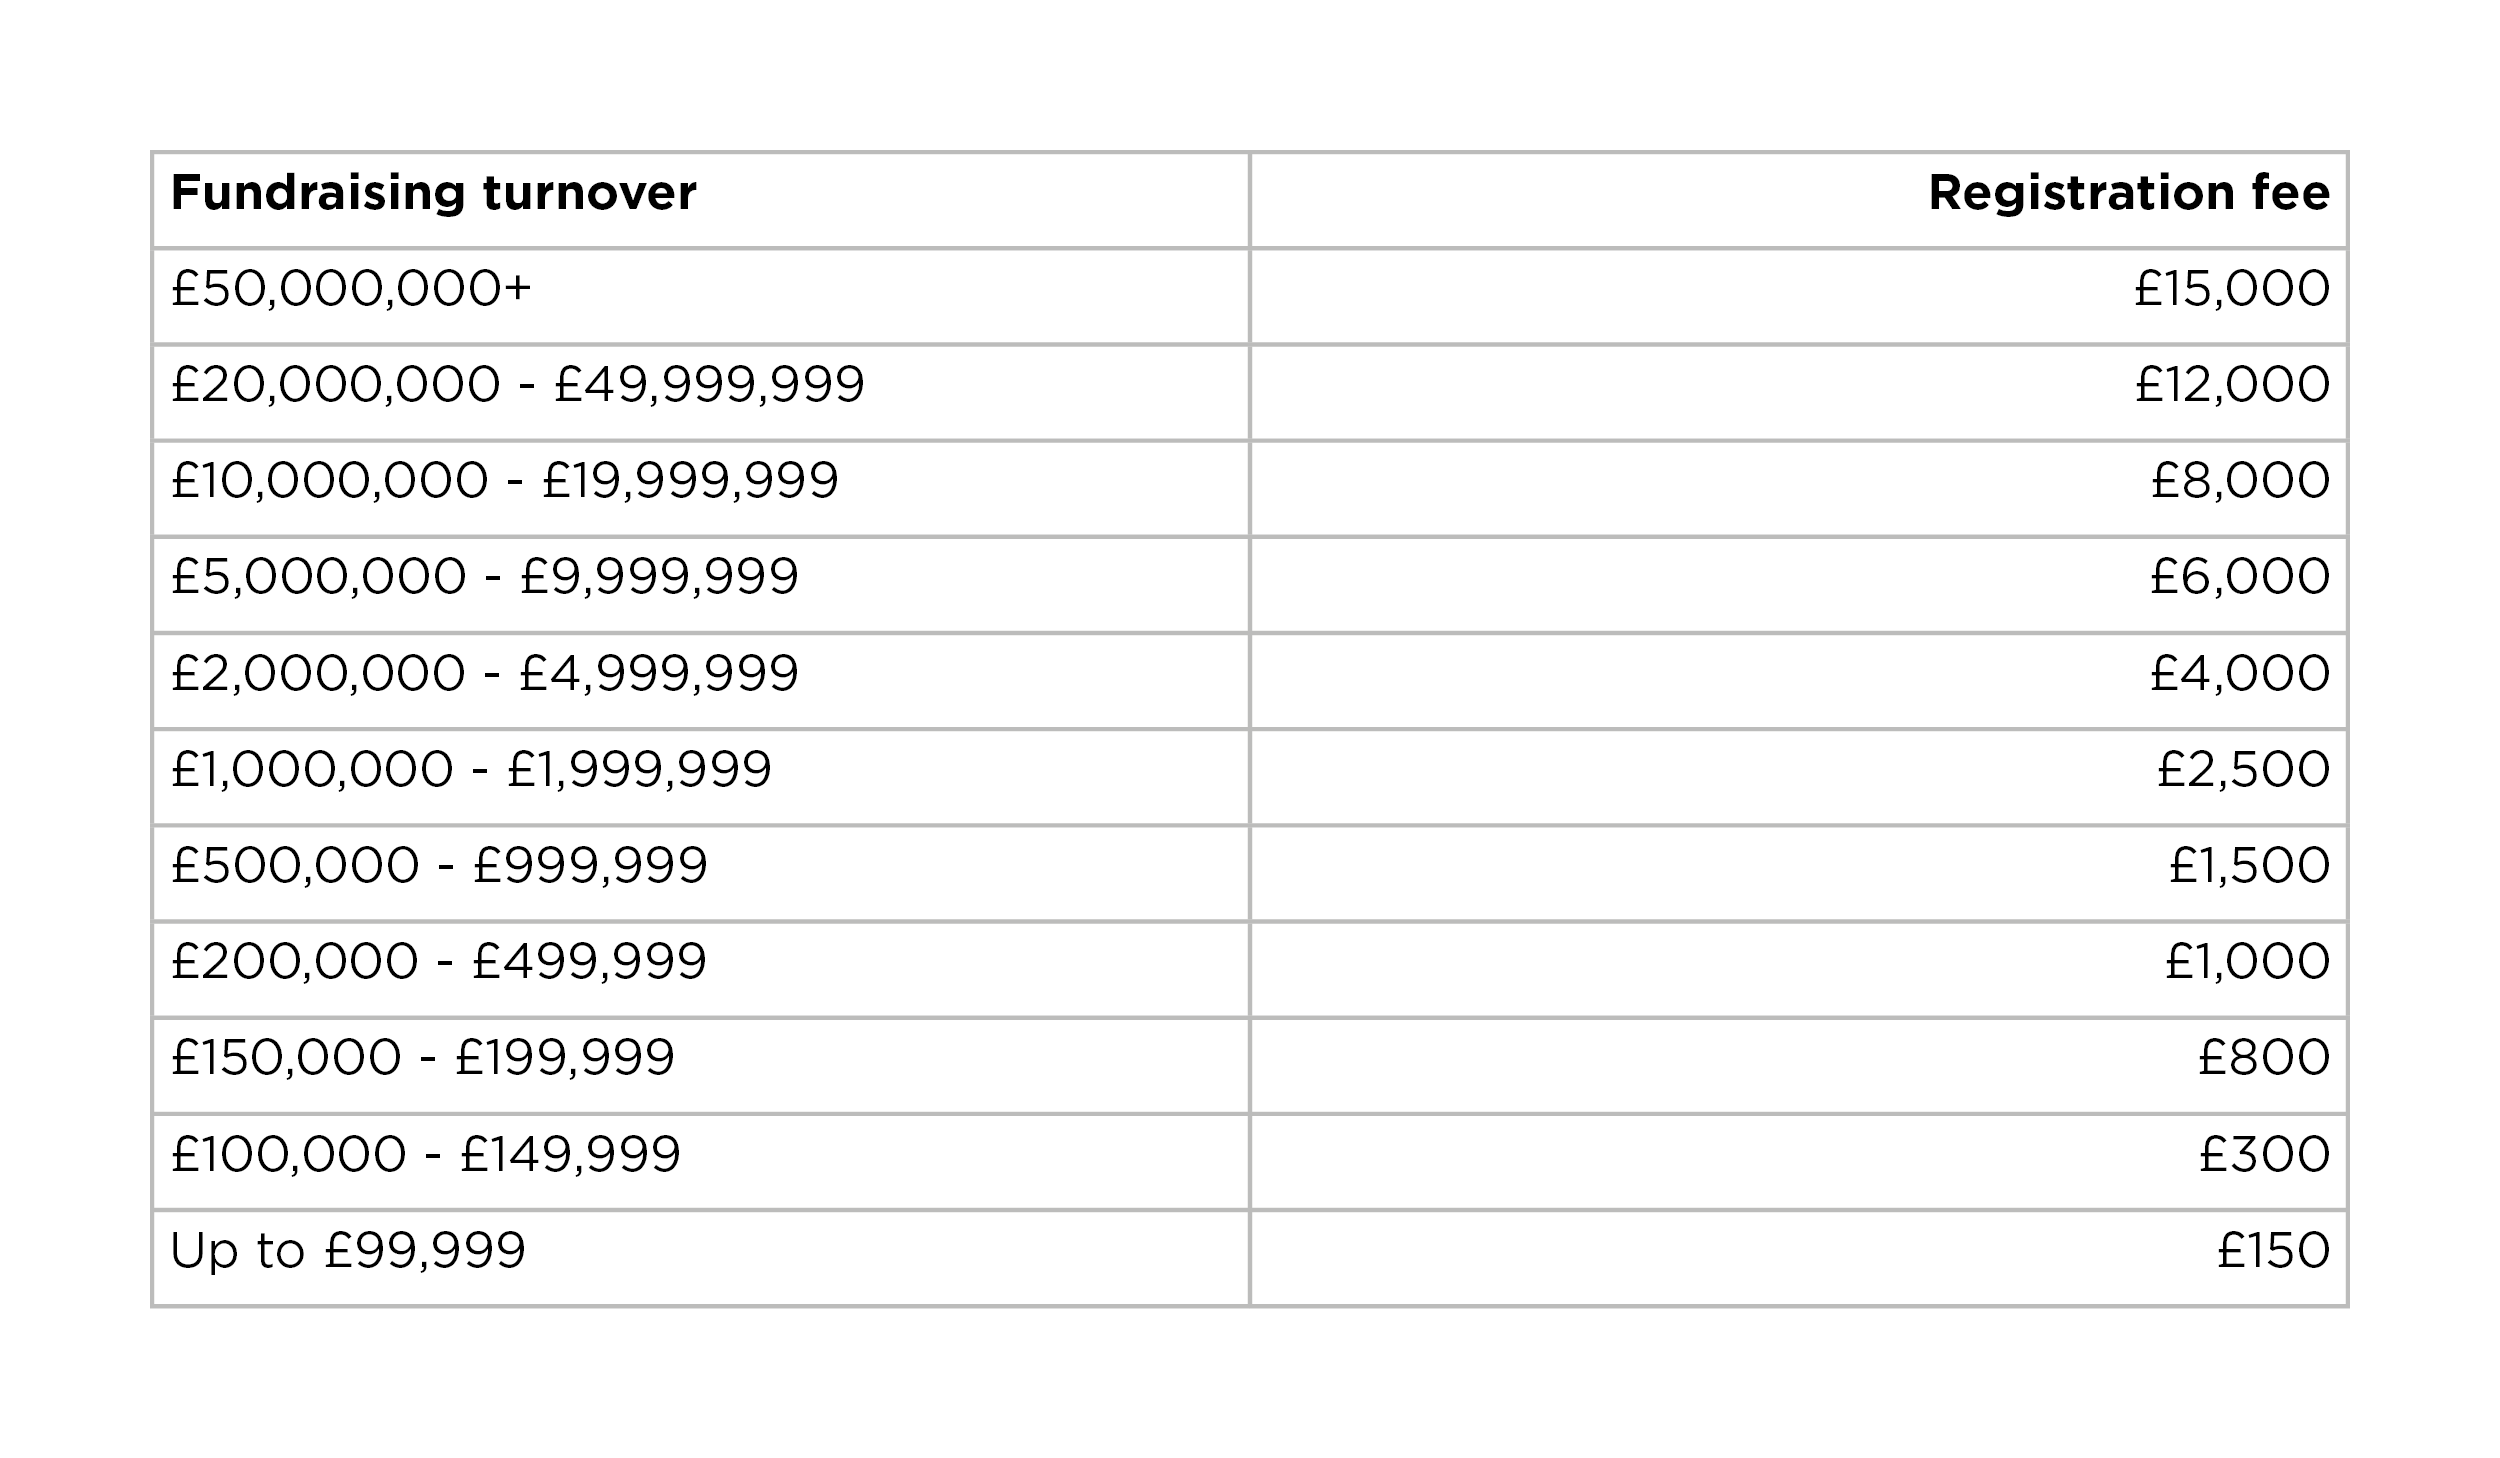 Table showing non charity registration fee bands